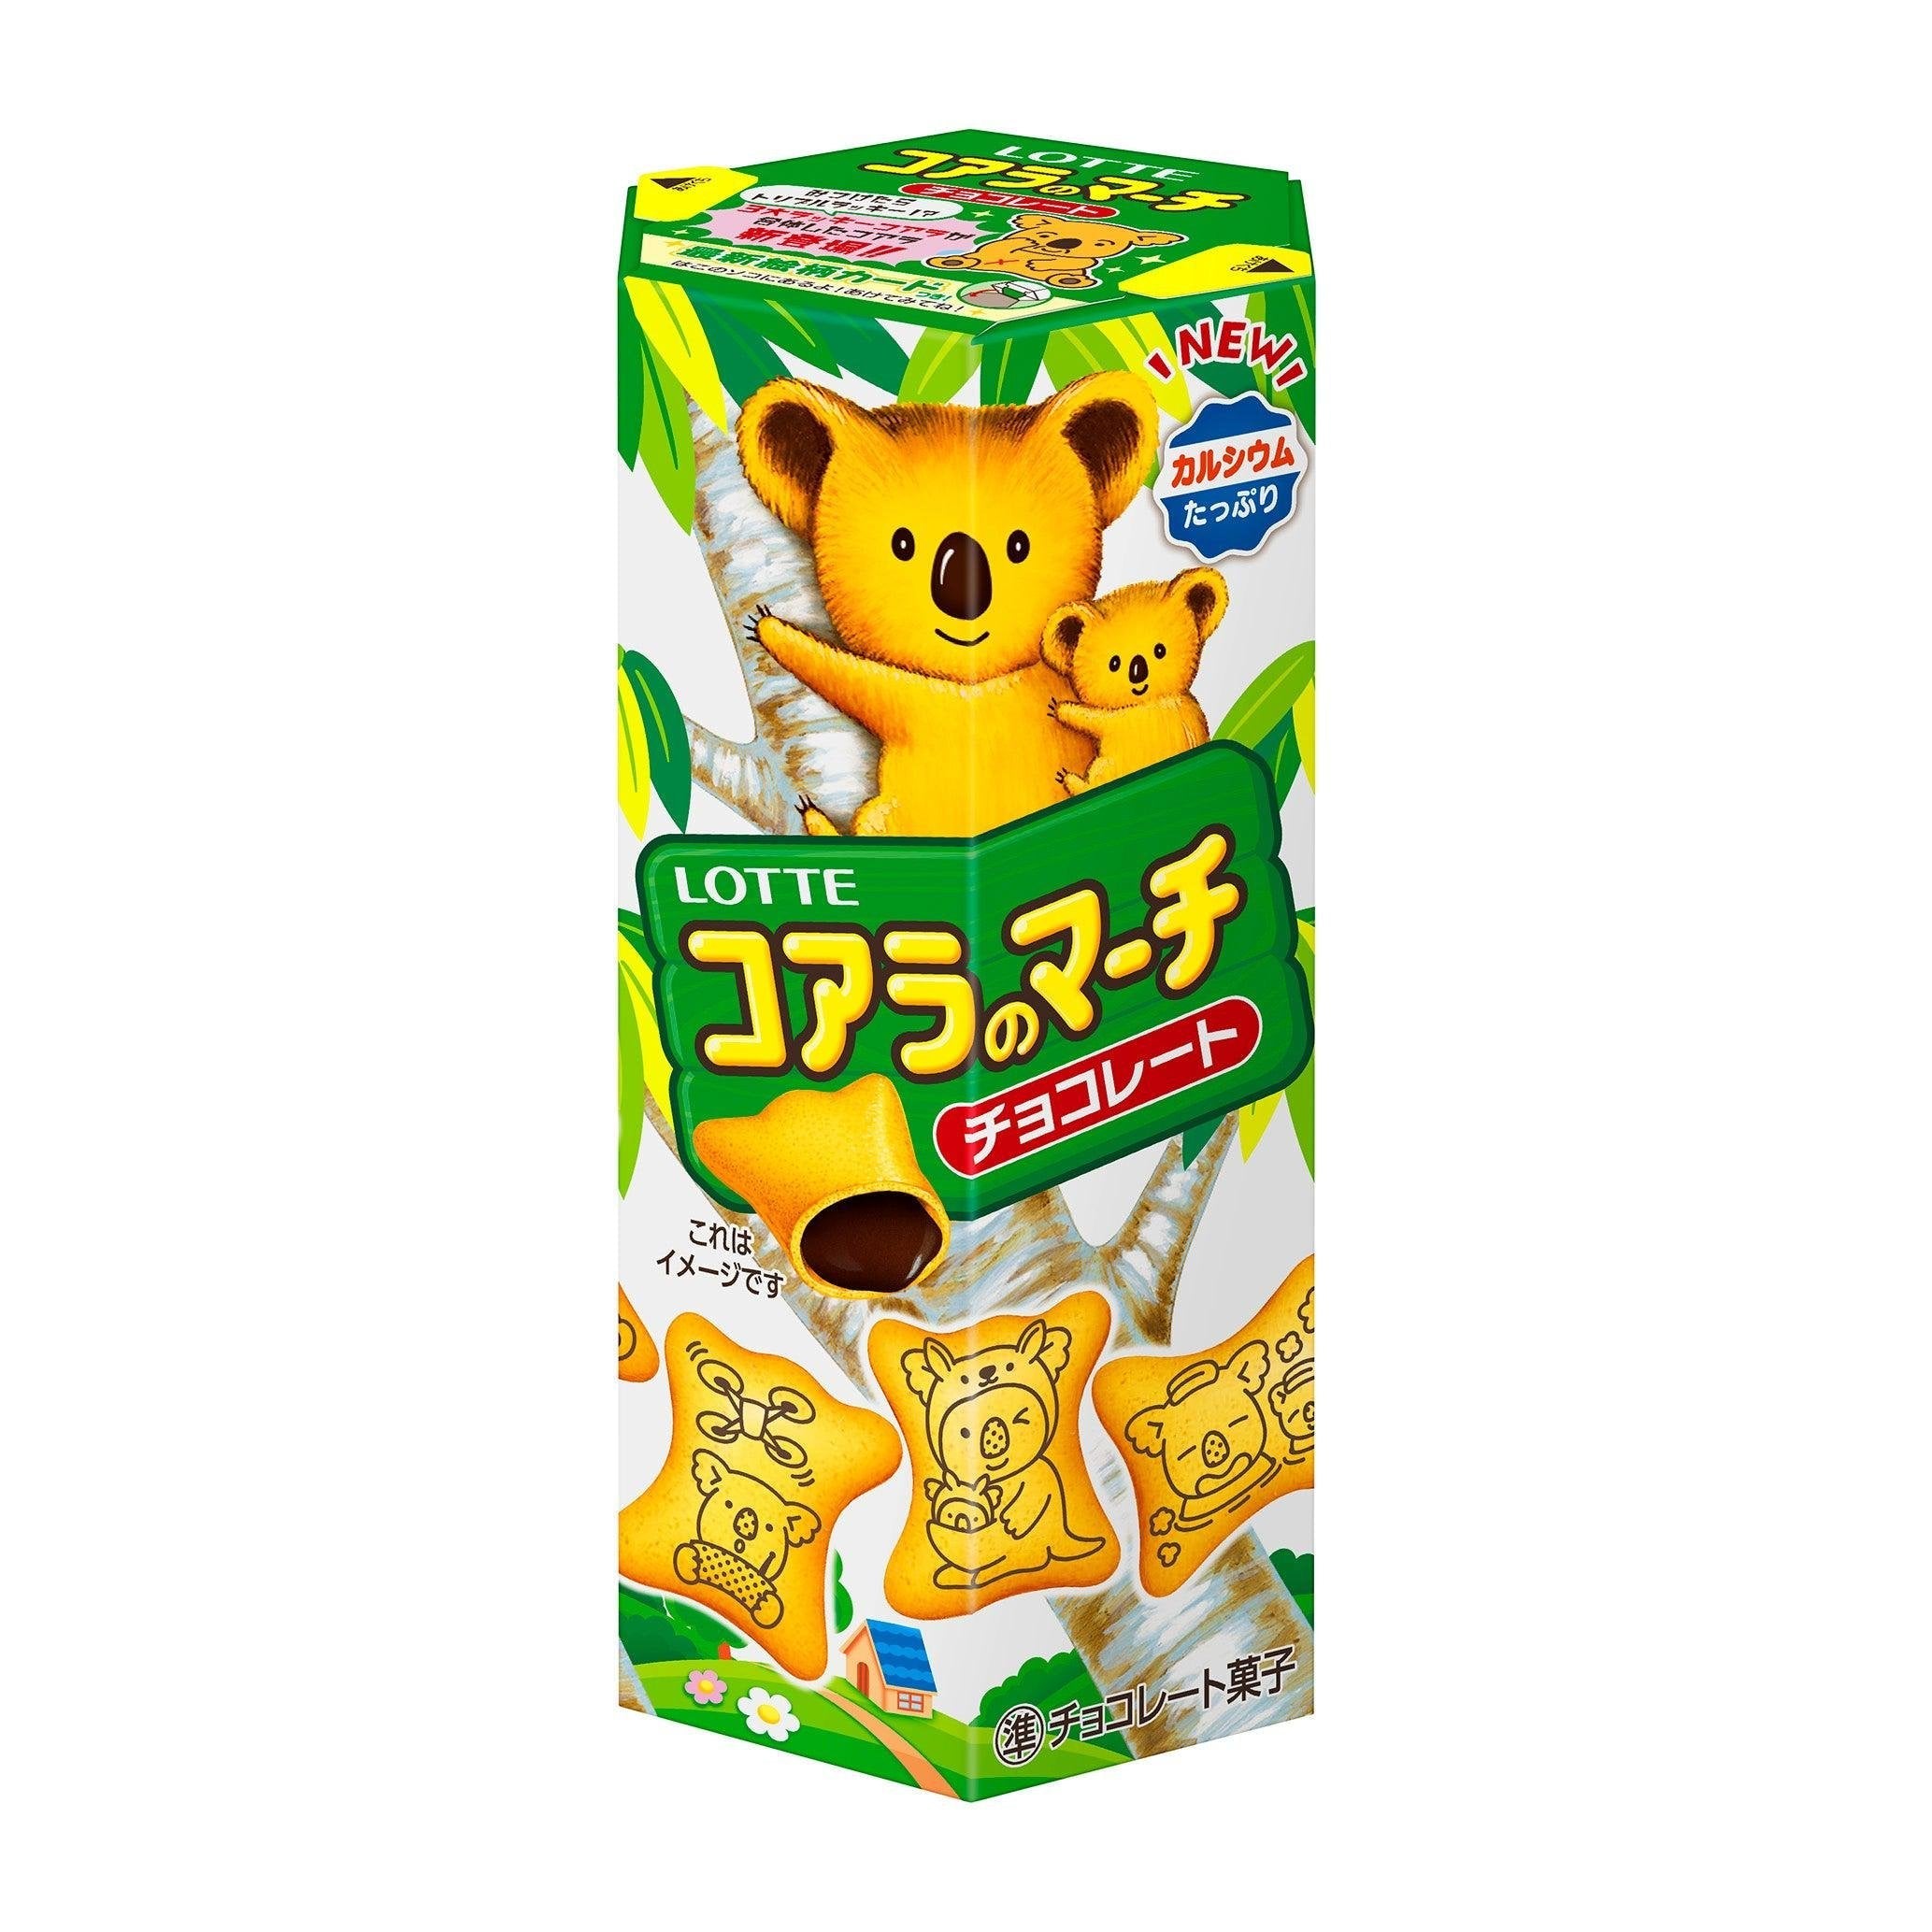 Lotte Koalas March Bite Sized Biscuit with Chocolate Filling 48g